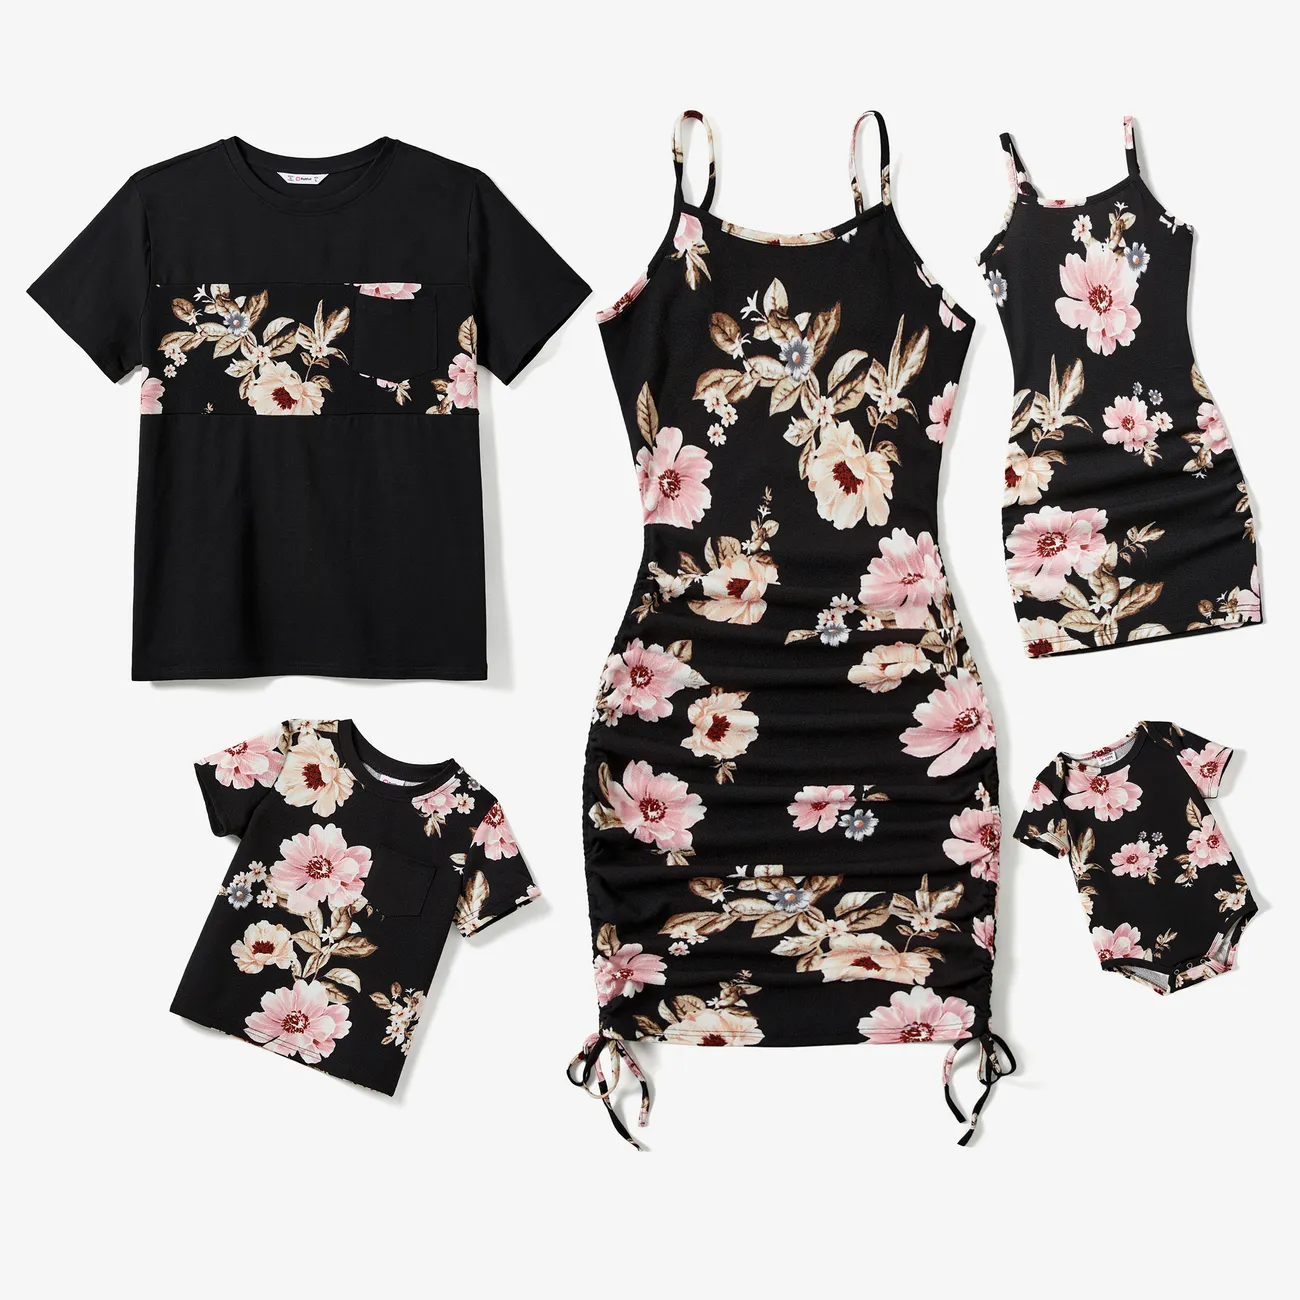 Family Matching Floral Panel Tee and Floral Drawstring Side Bodycon Strap Dress Sets Black big image 1